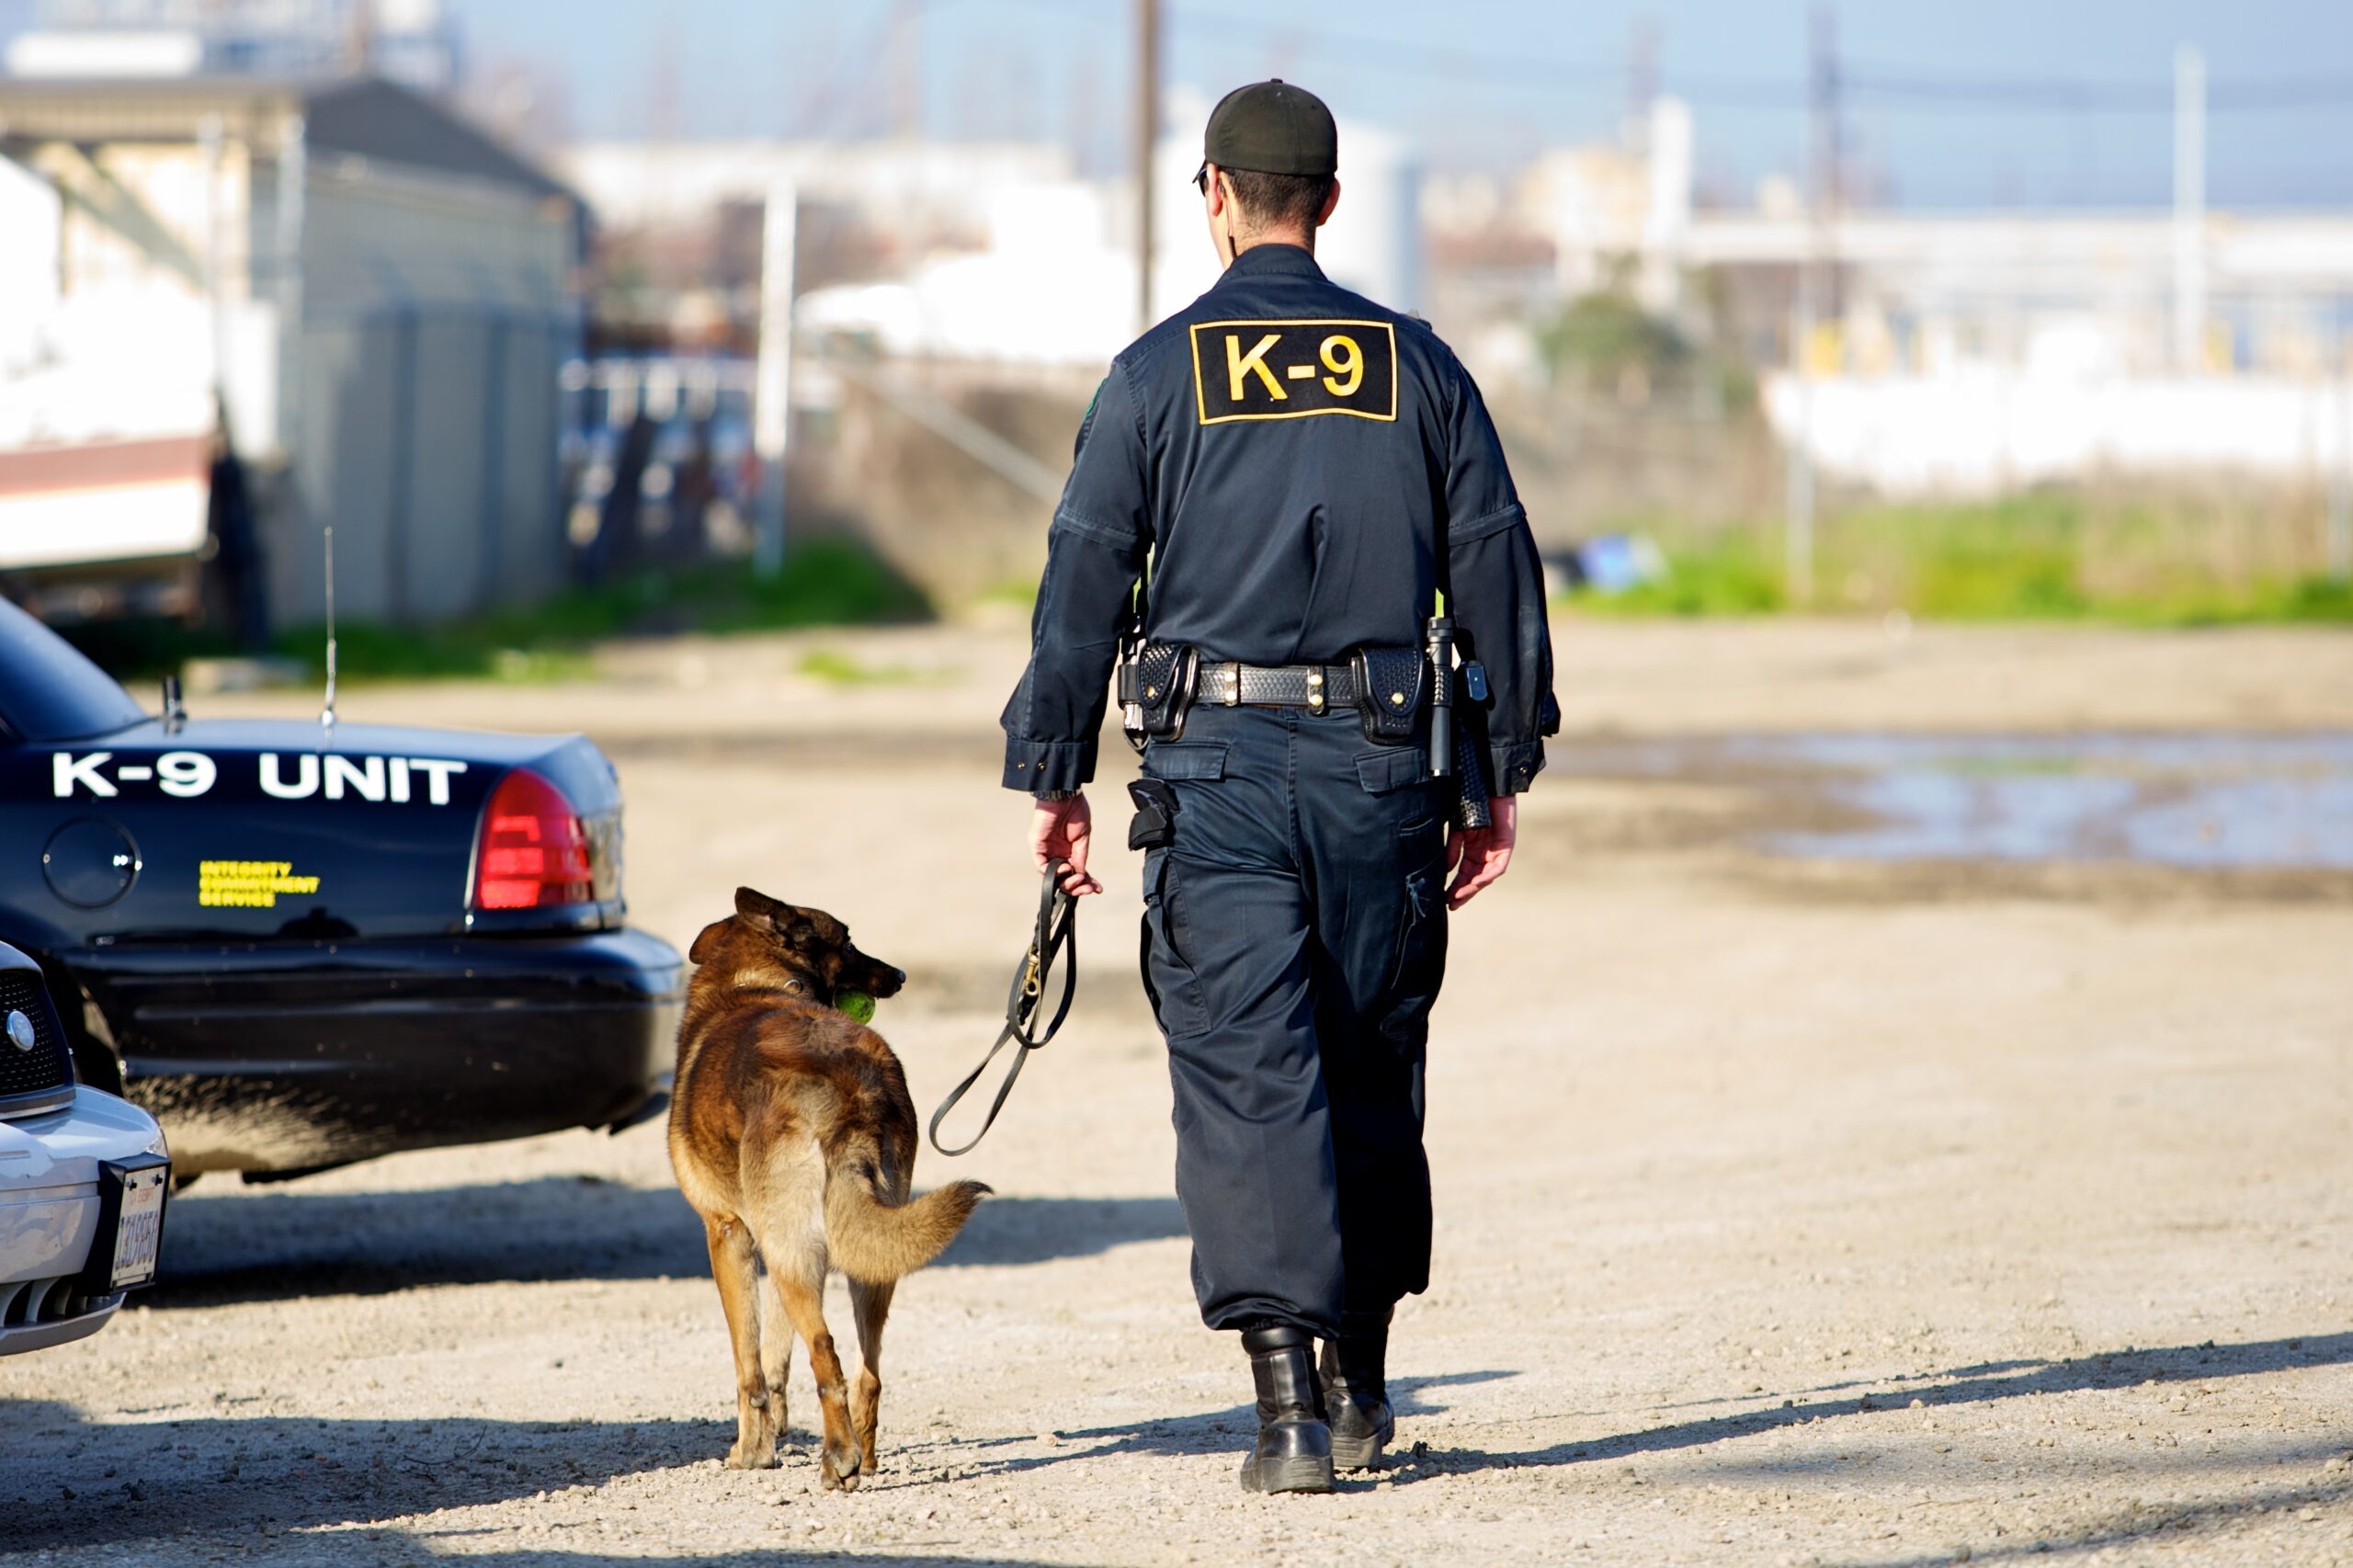 Featured image for “Lasers Are Tools for K-9 Training Units, Police and Military”